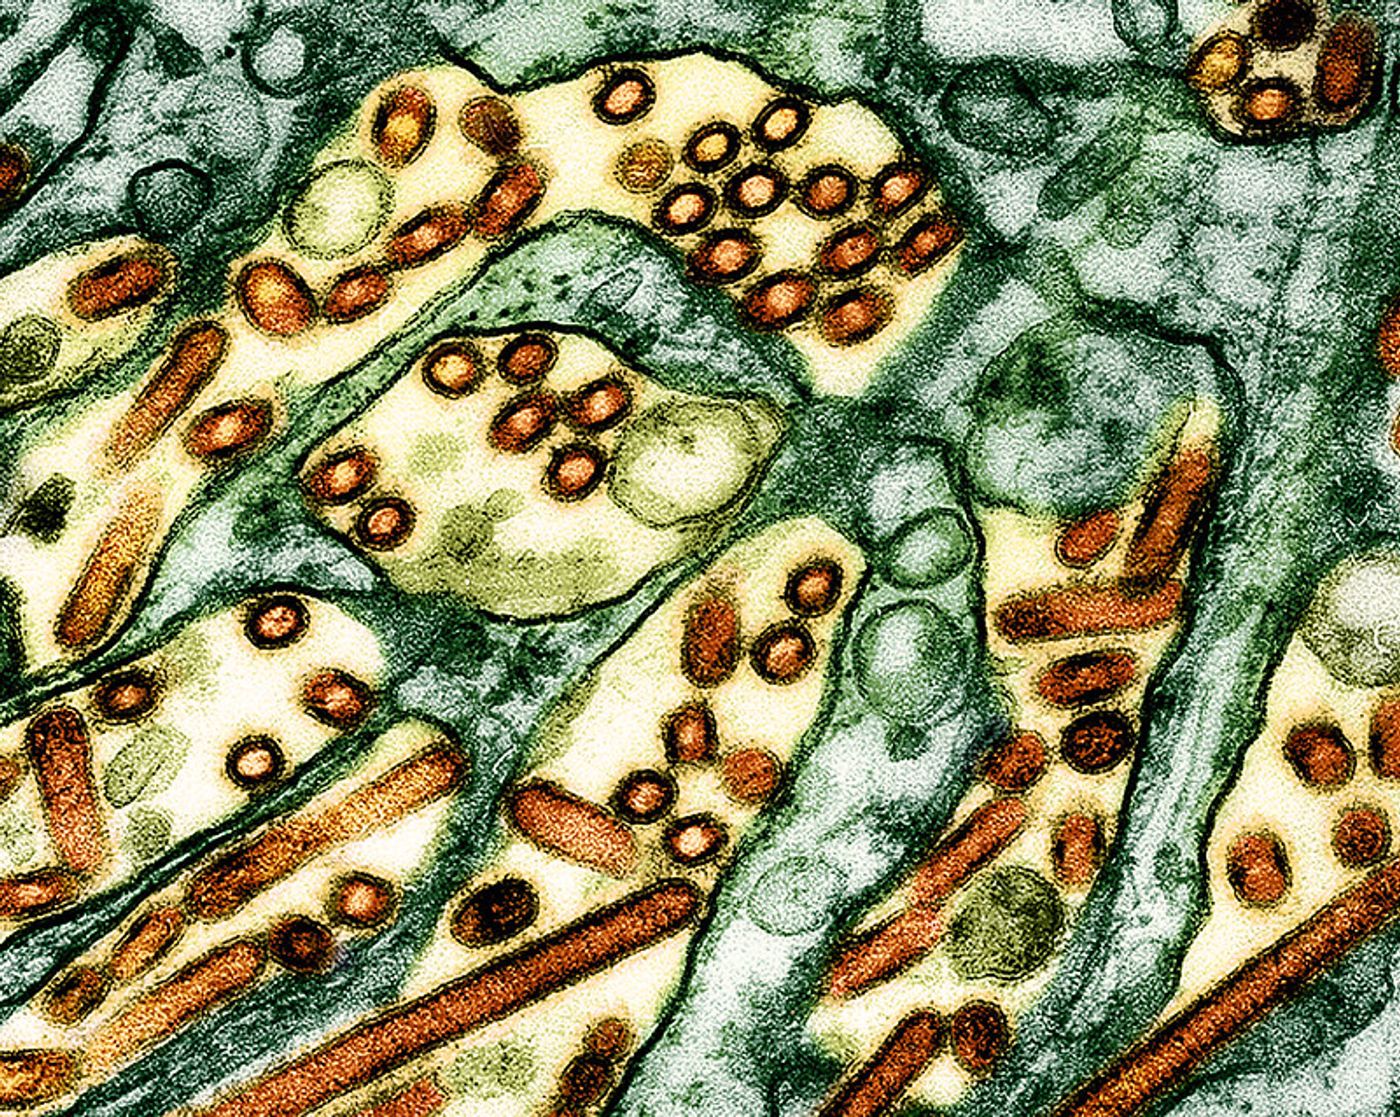 Colorized transmission electron micrograph of avian influenza A H5N1 virus particles (yellow/red), grown in Madin-Darby Canine Kidney (MDCK) epithelial cells. Microscopy by CDC; repositioned and recolored by NIAID. Credit: CDC and NIAID